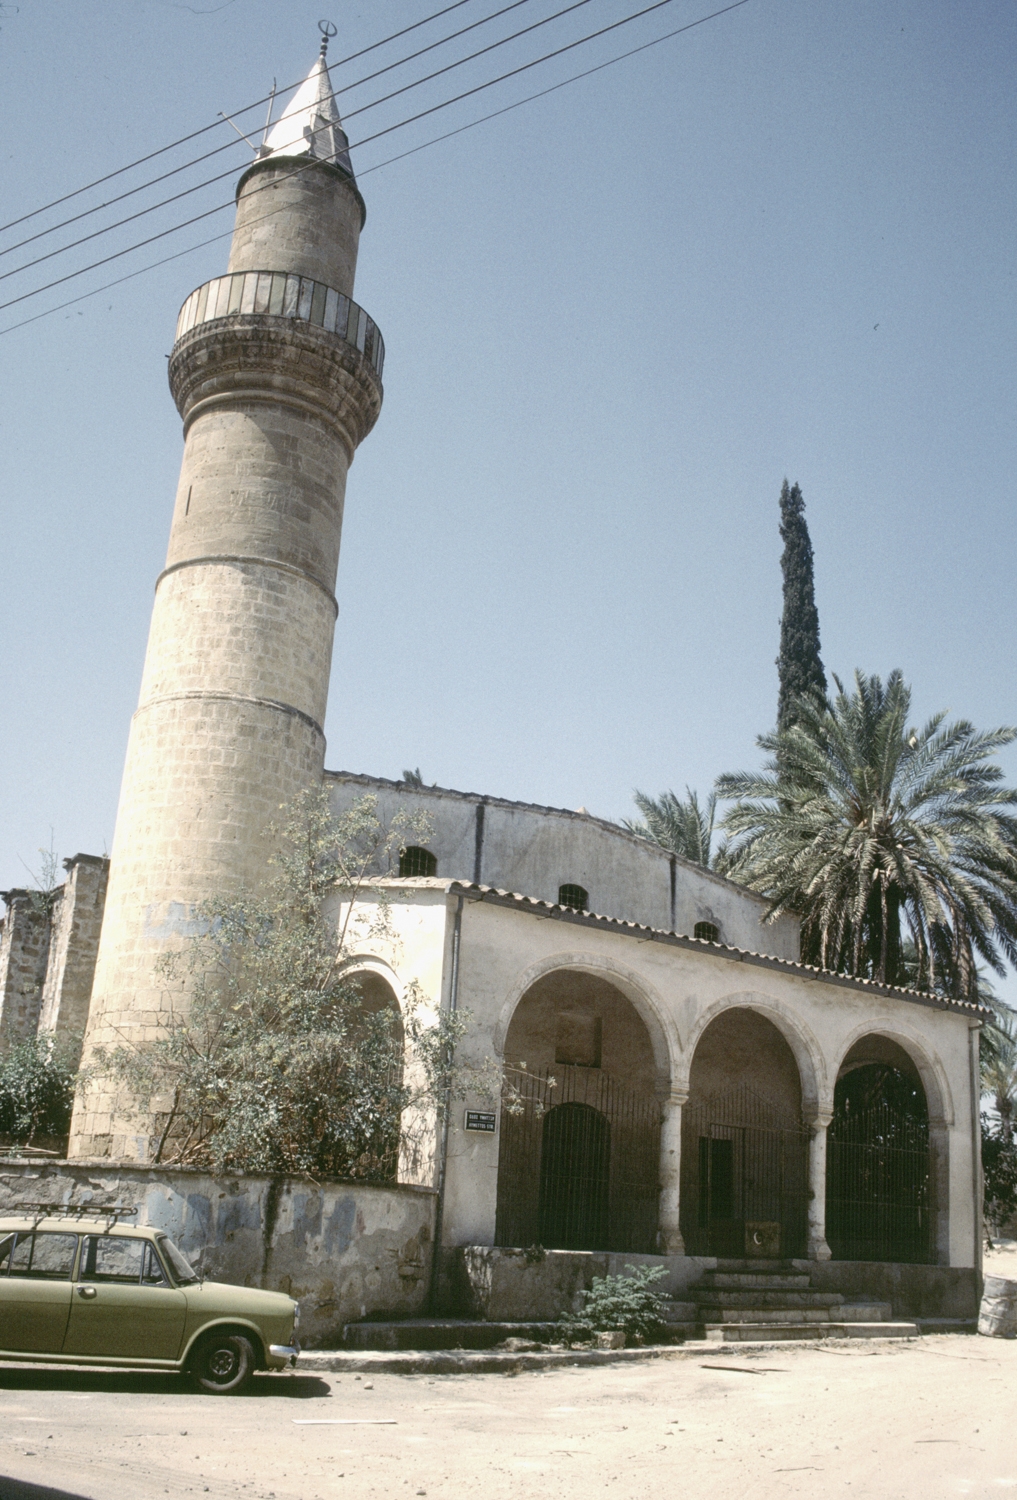 Northeast view, with minaret and entrance portico